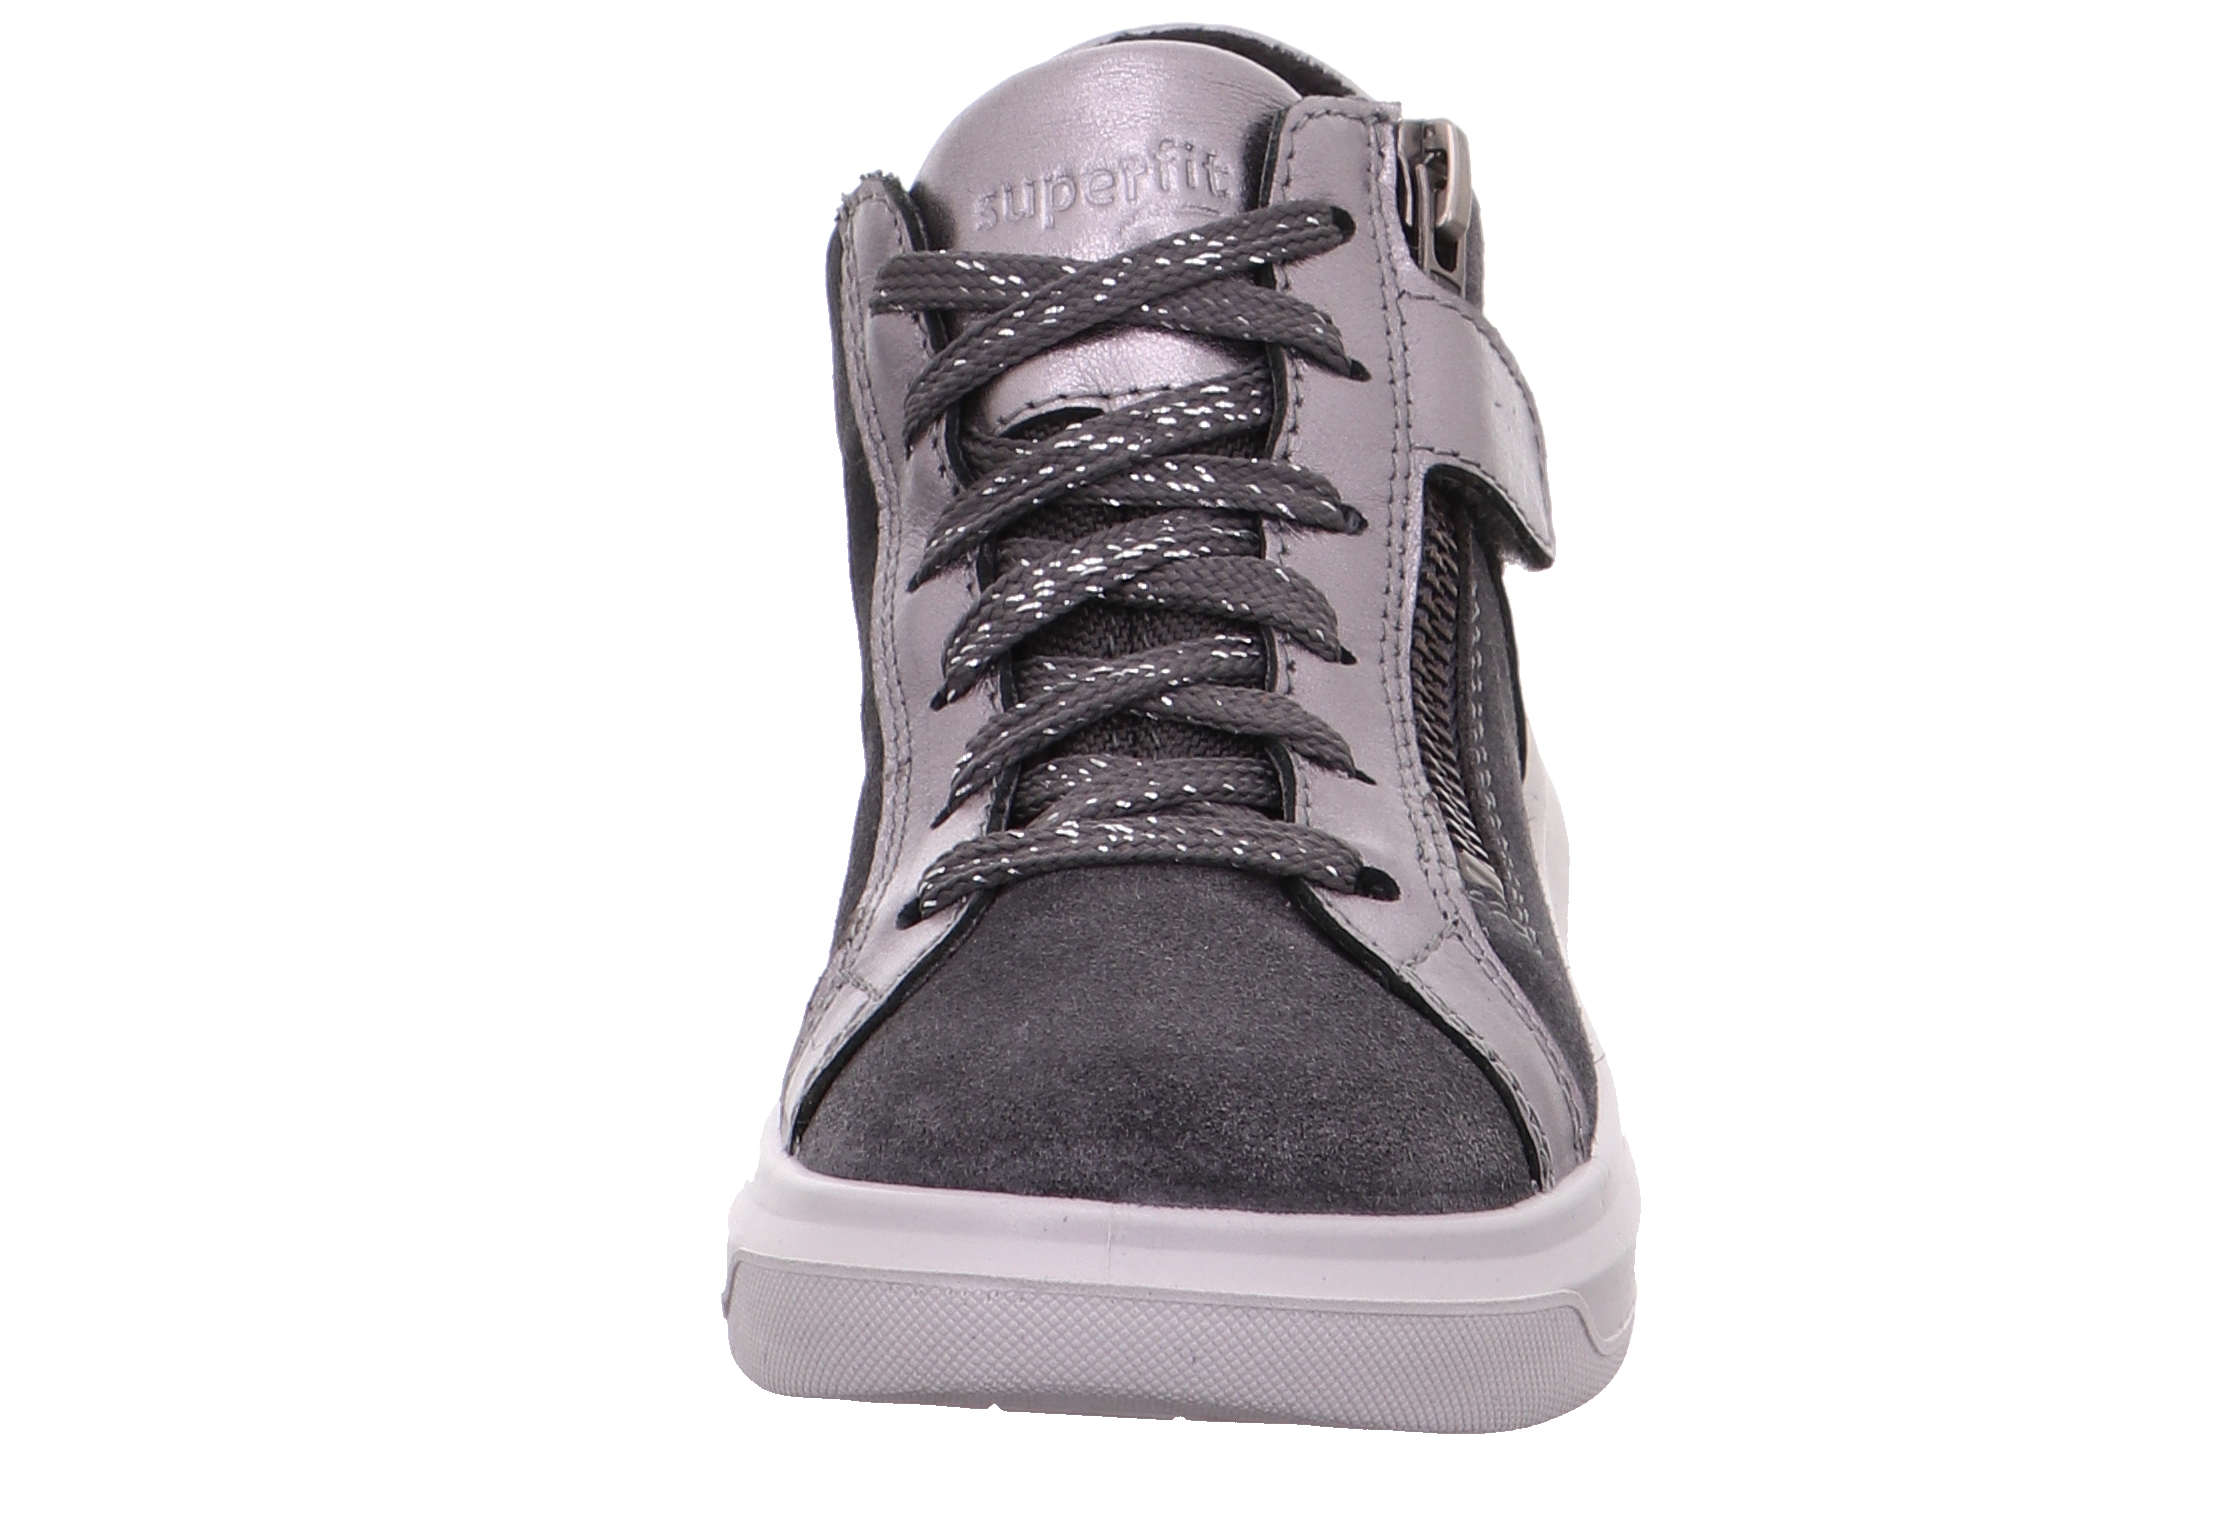 Superfit Cosmo - Grey / Silver suede leather